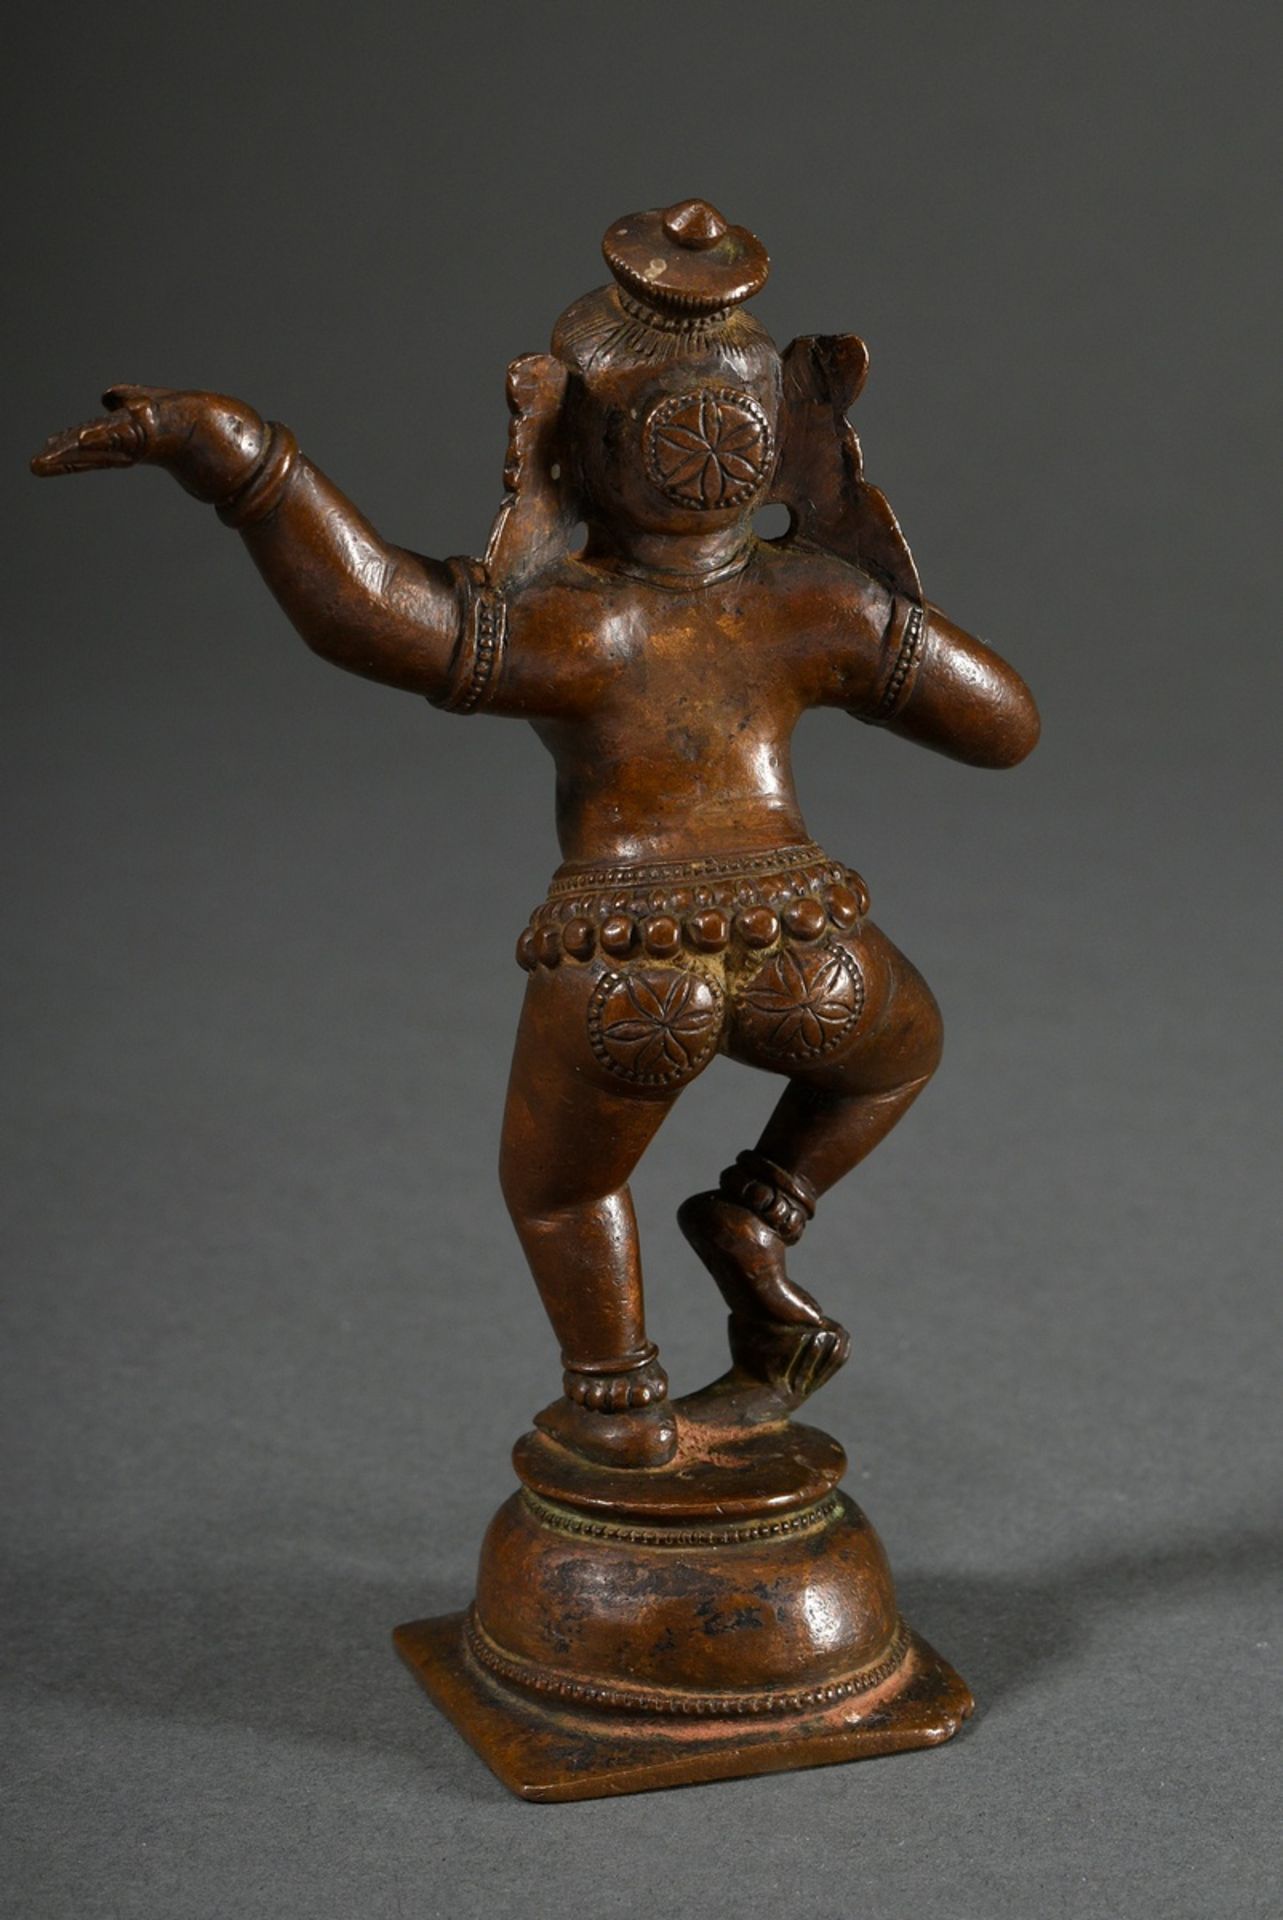 Bronze figure "Dancing Krishna with butter ball", South India, 18th/19th c., h. 12.5cm, acquired in - Image 3 of 4